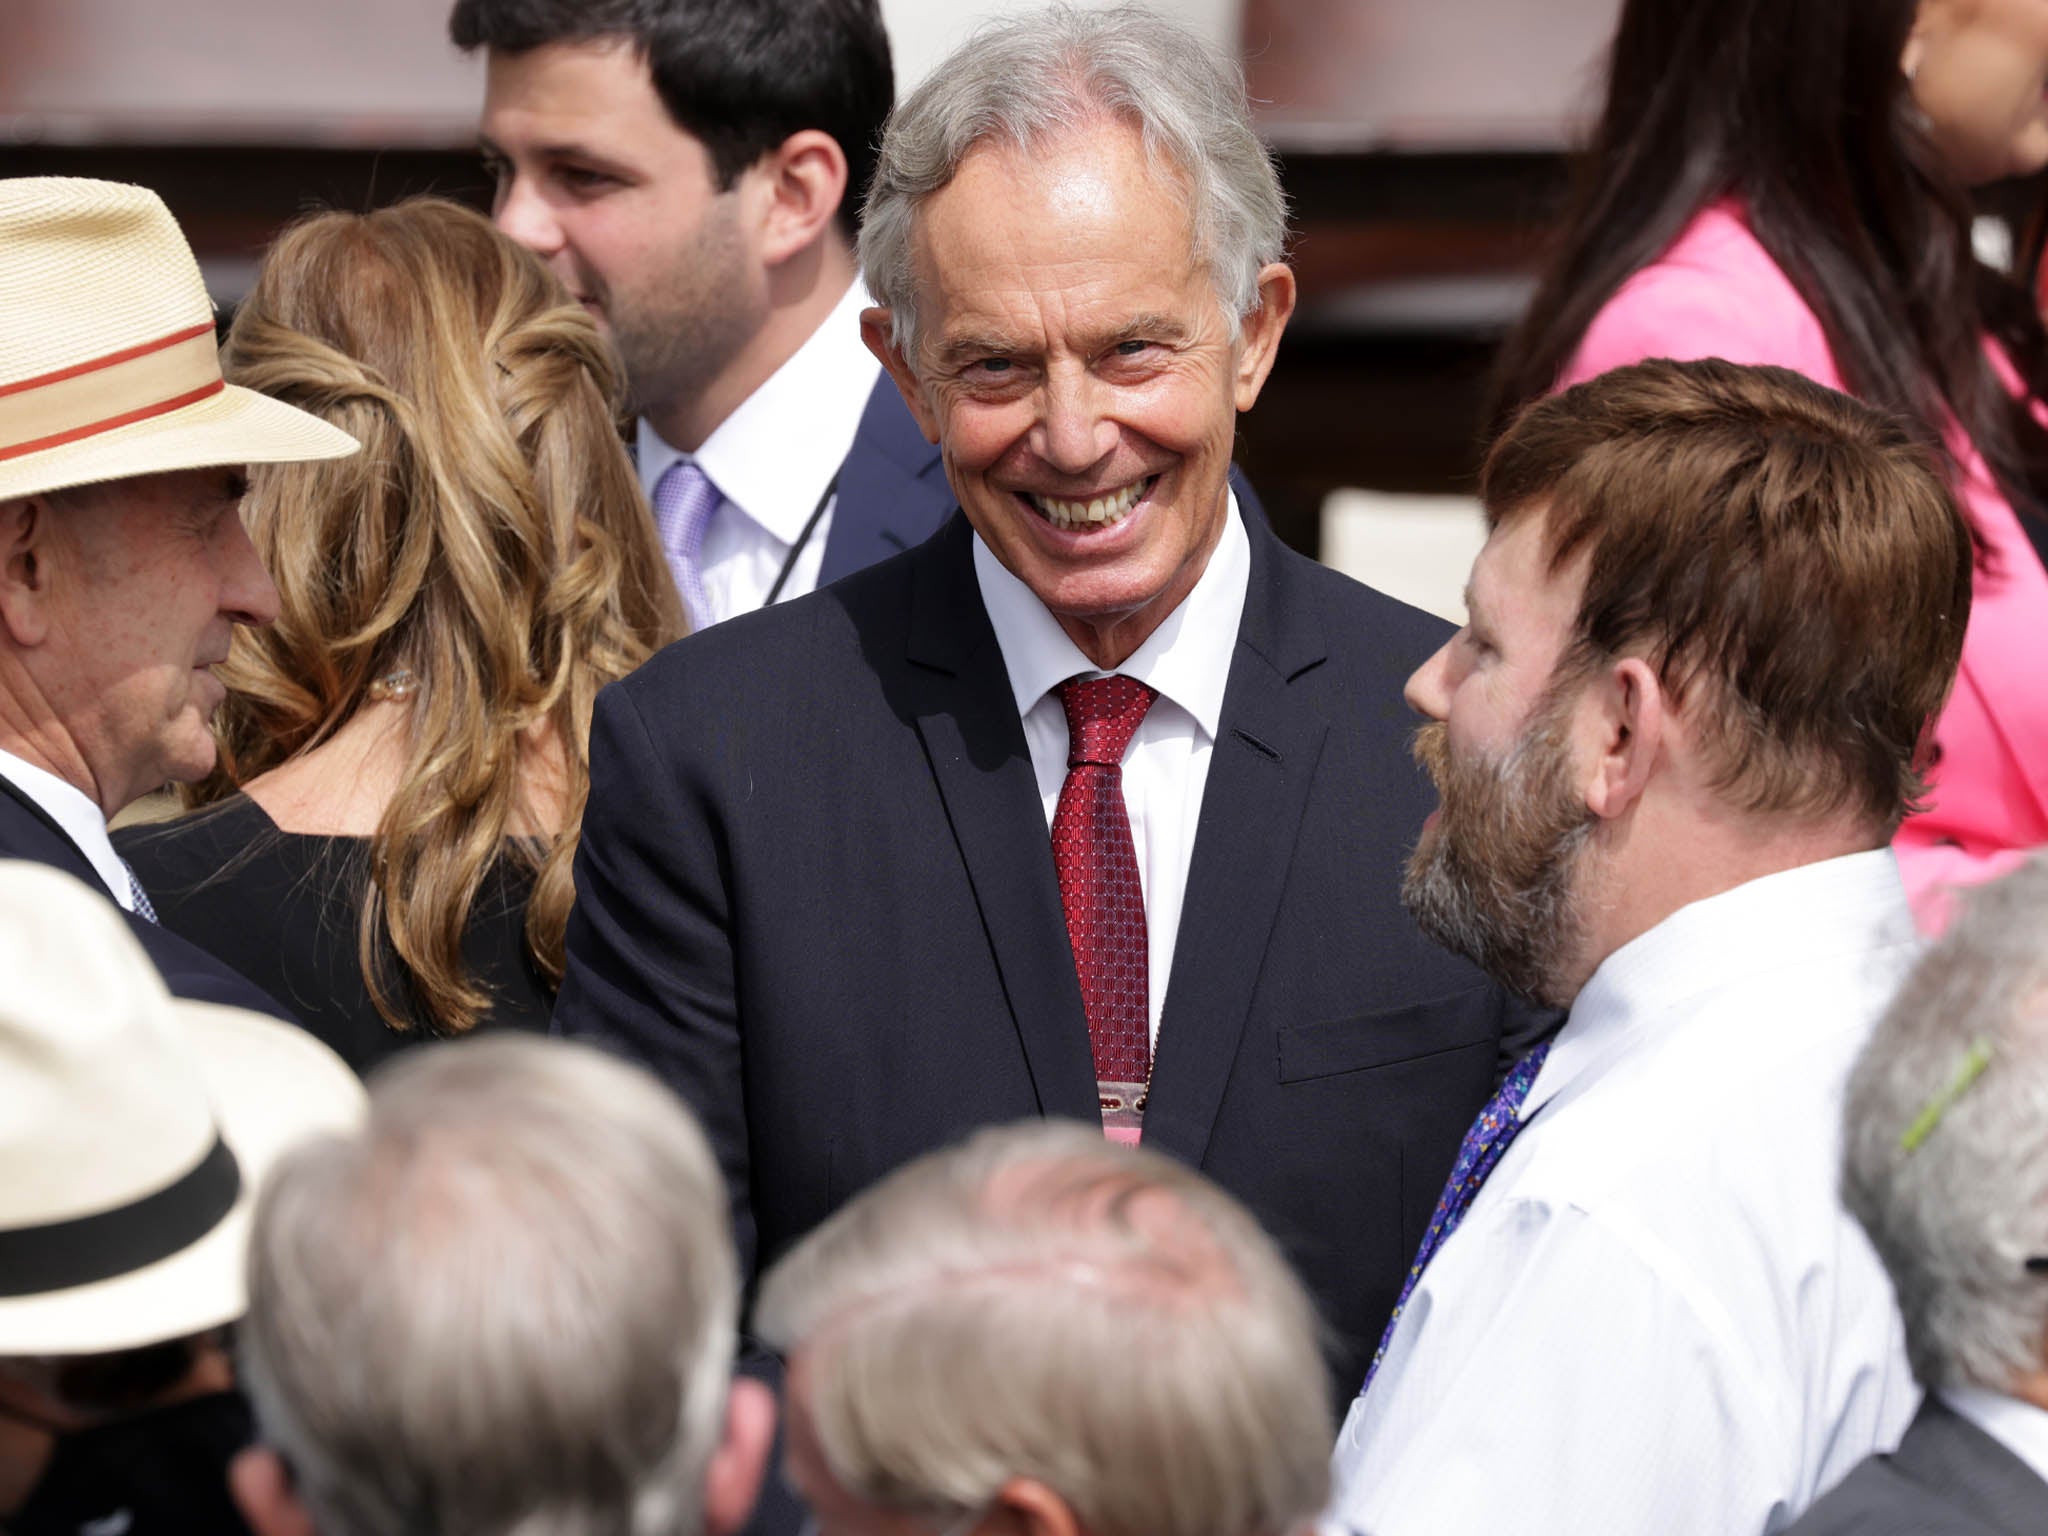 Tony Blair on the South Lawn of the White House on 15 September 2020